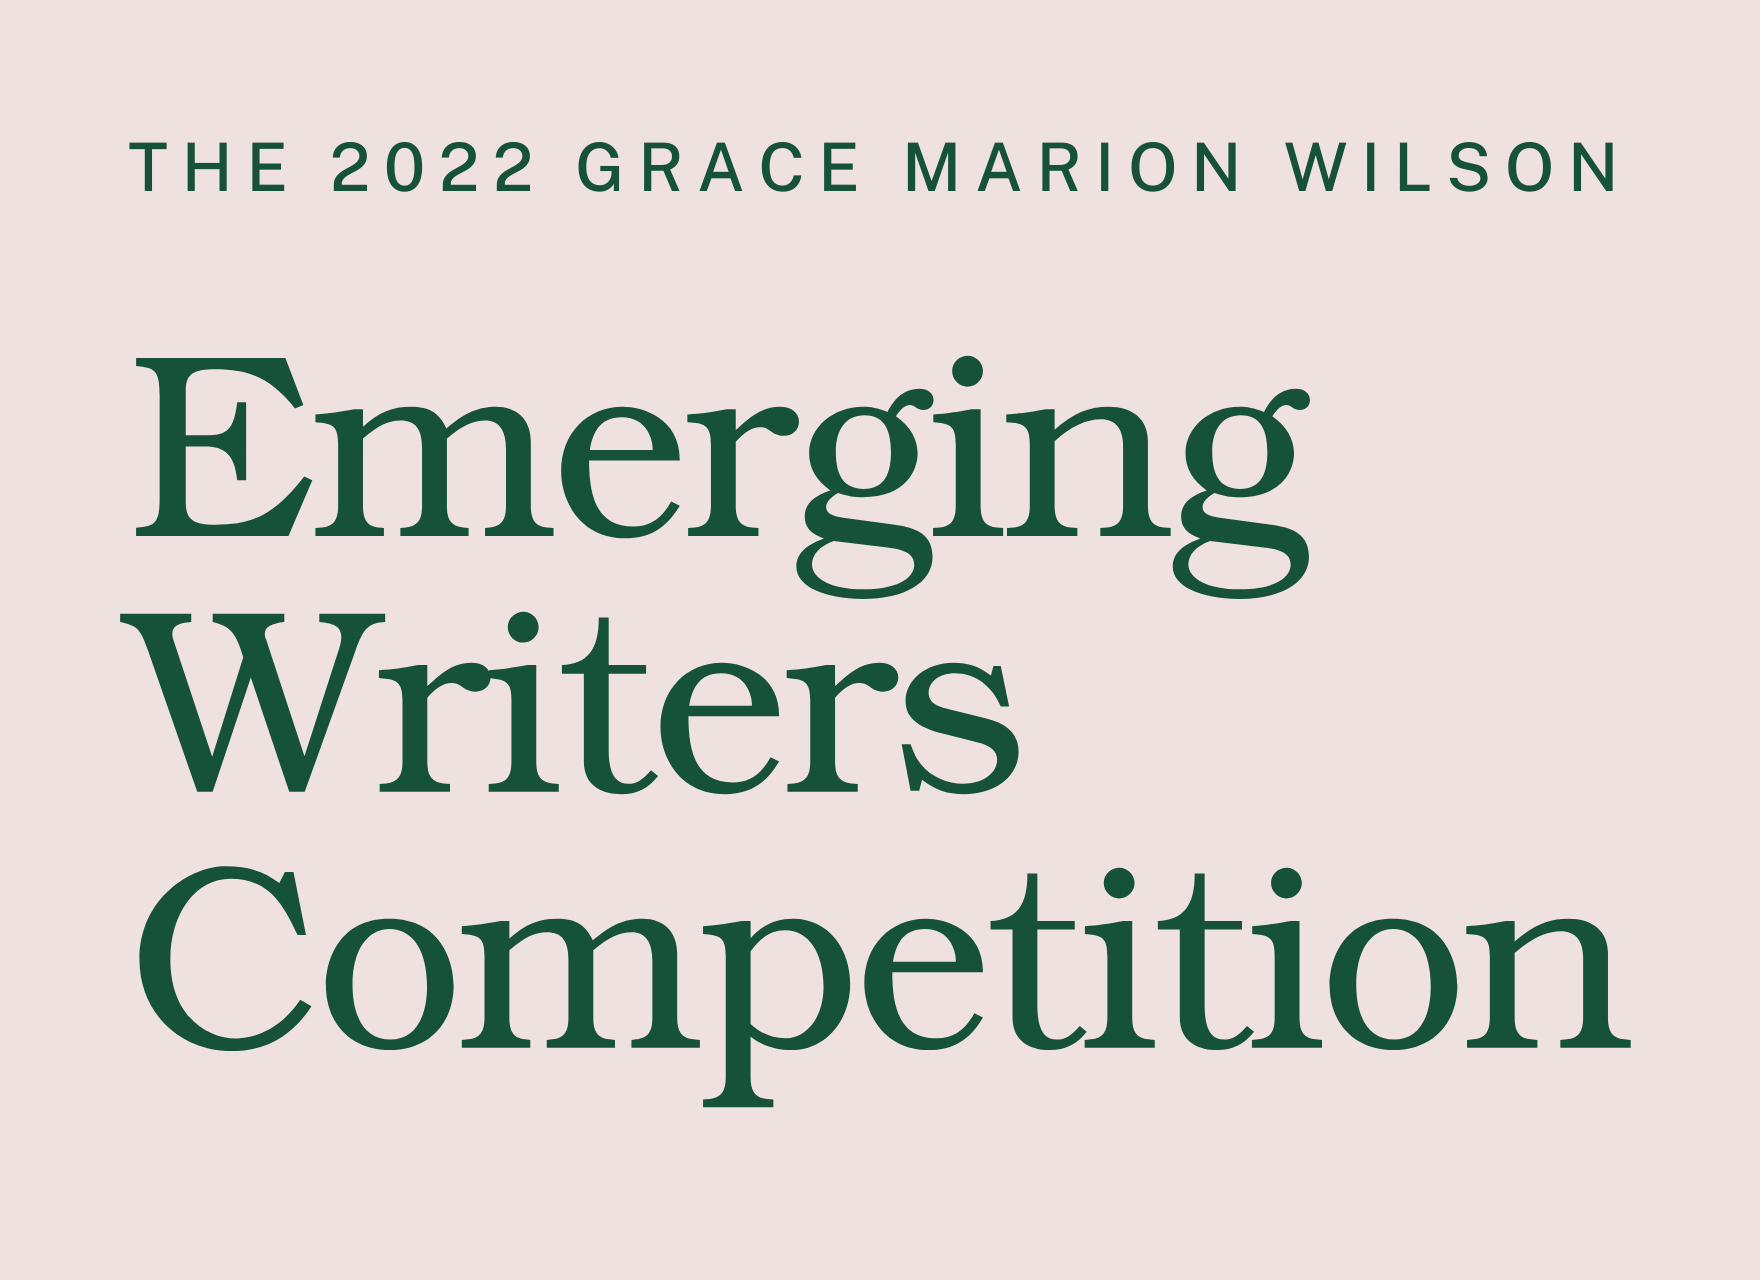 The Winners of the 2022 Emerging Writers Competition